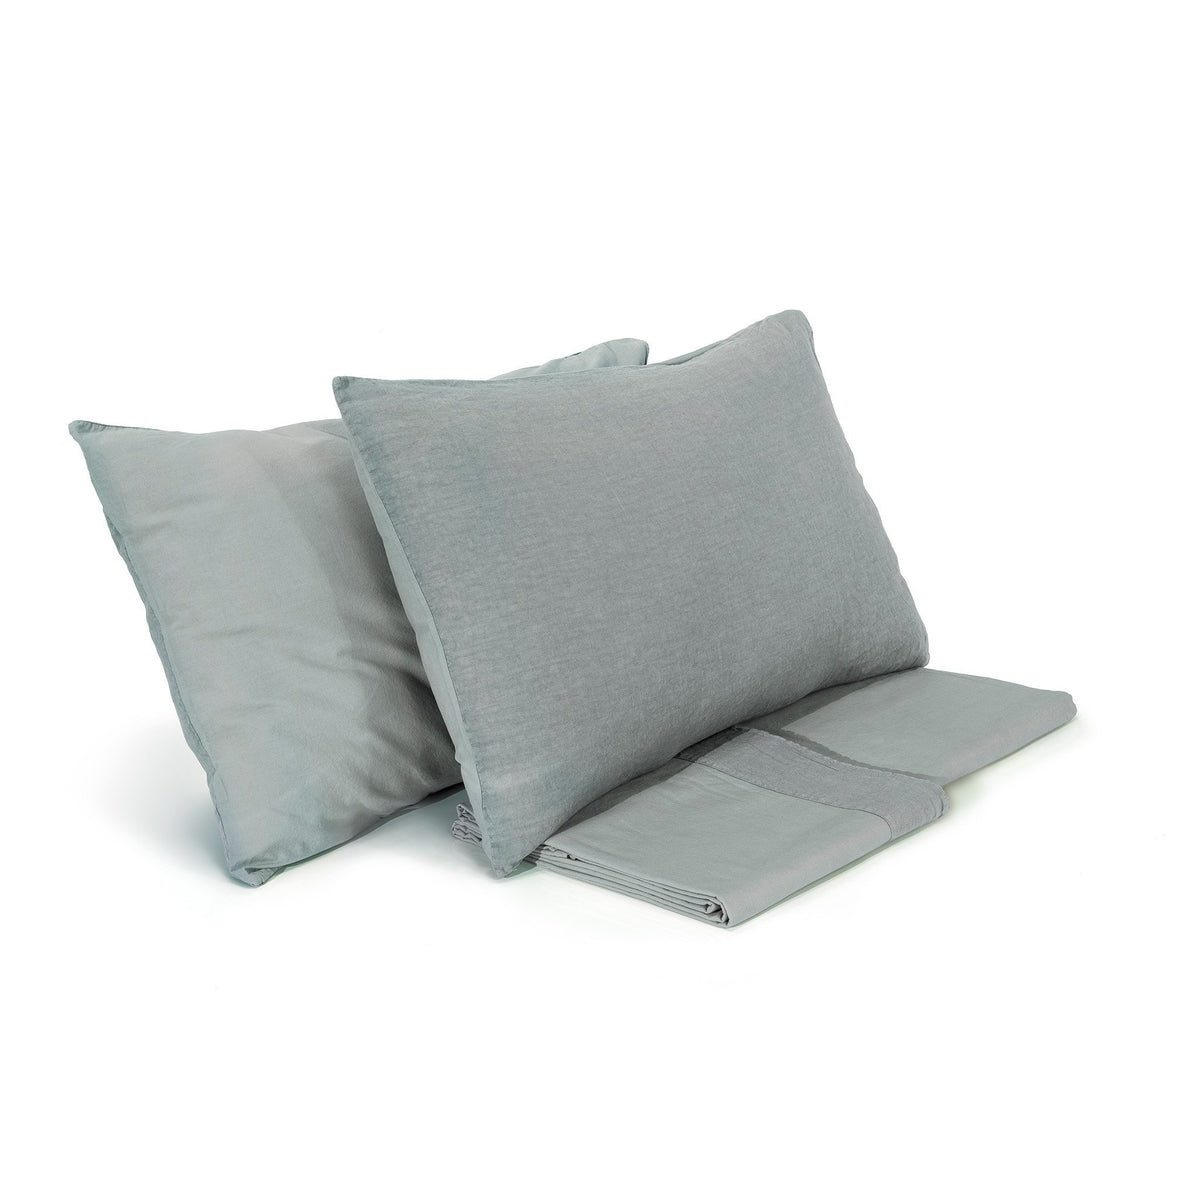 Duvet Cover Set in Stonewashed Cotton and Linen - Loira